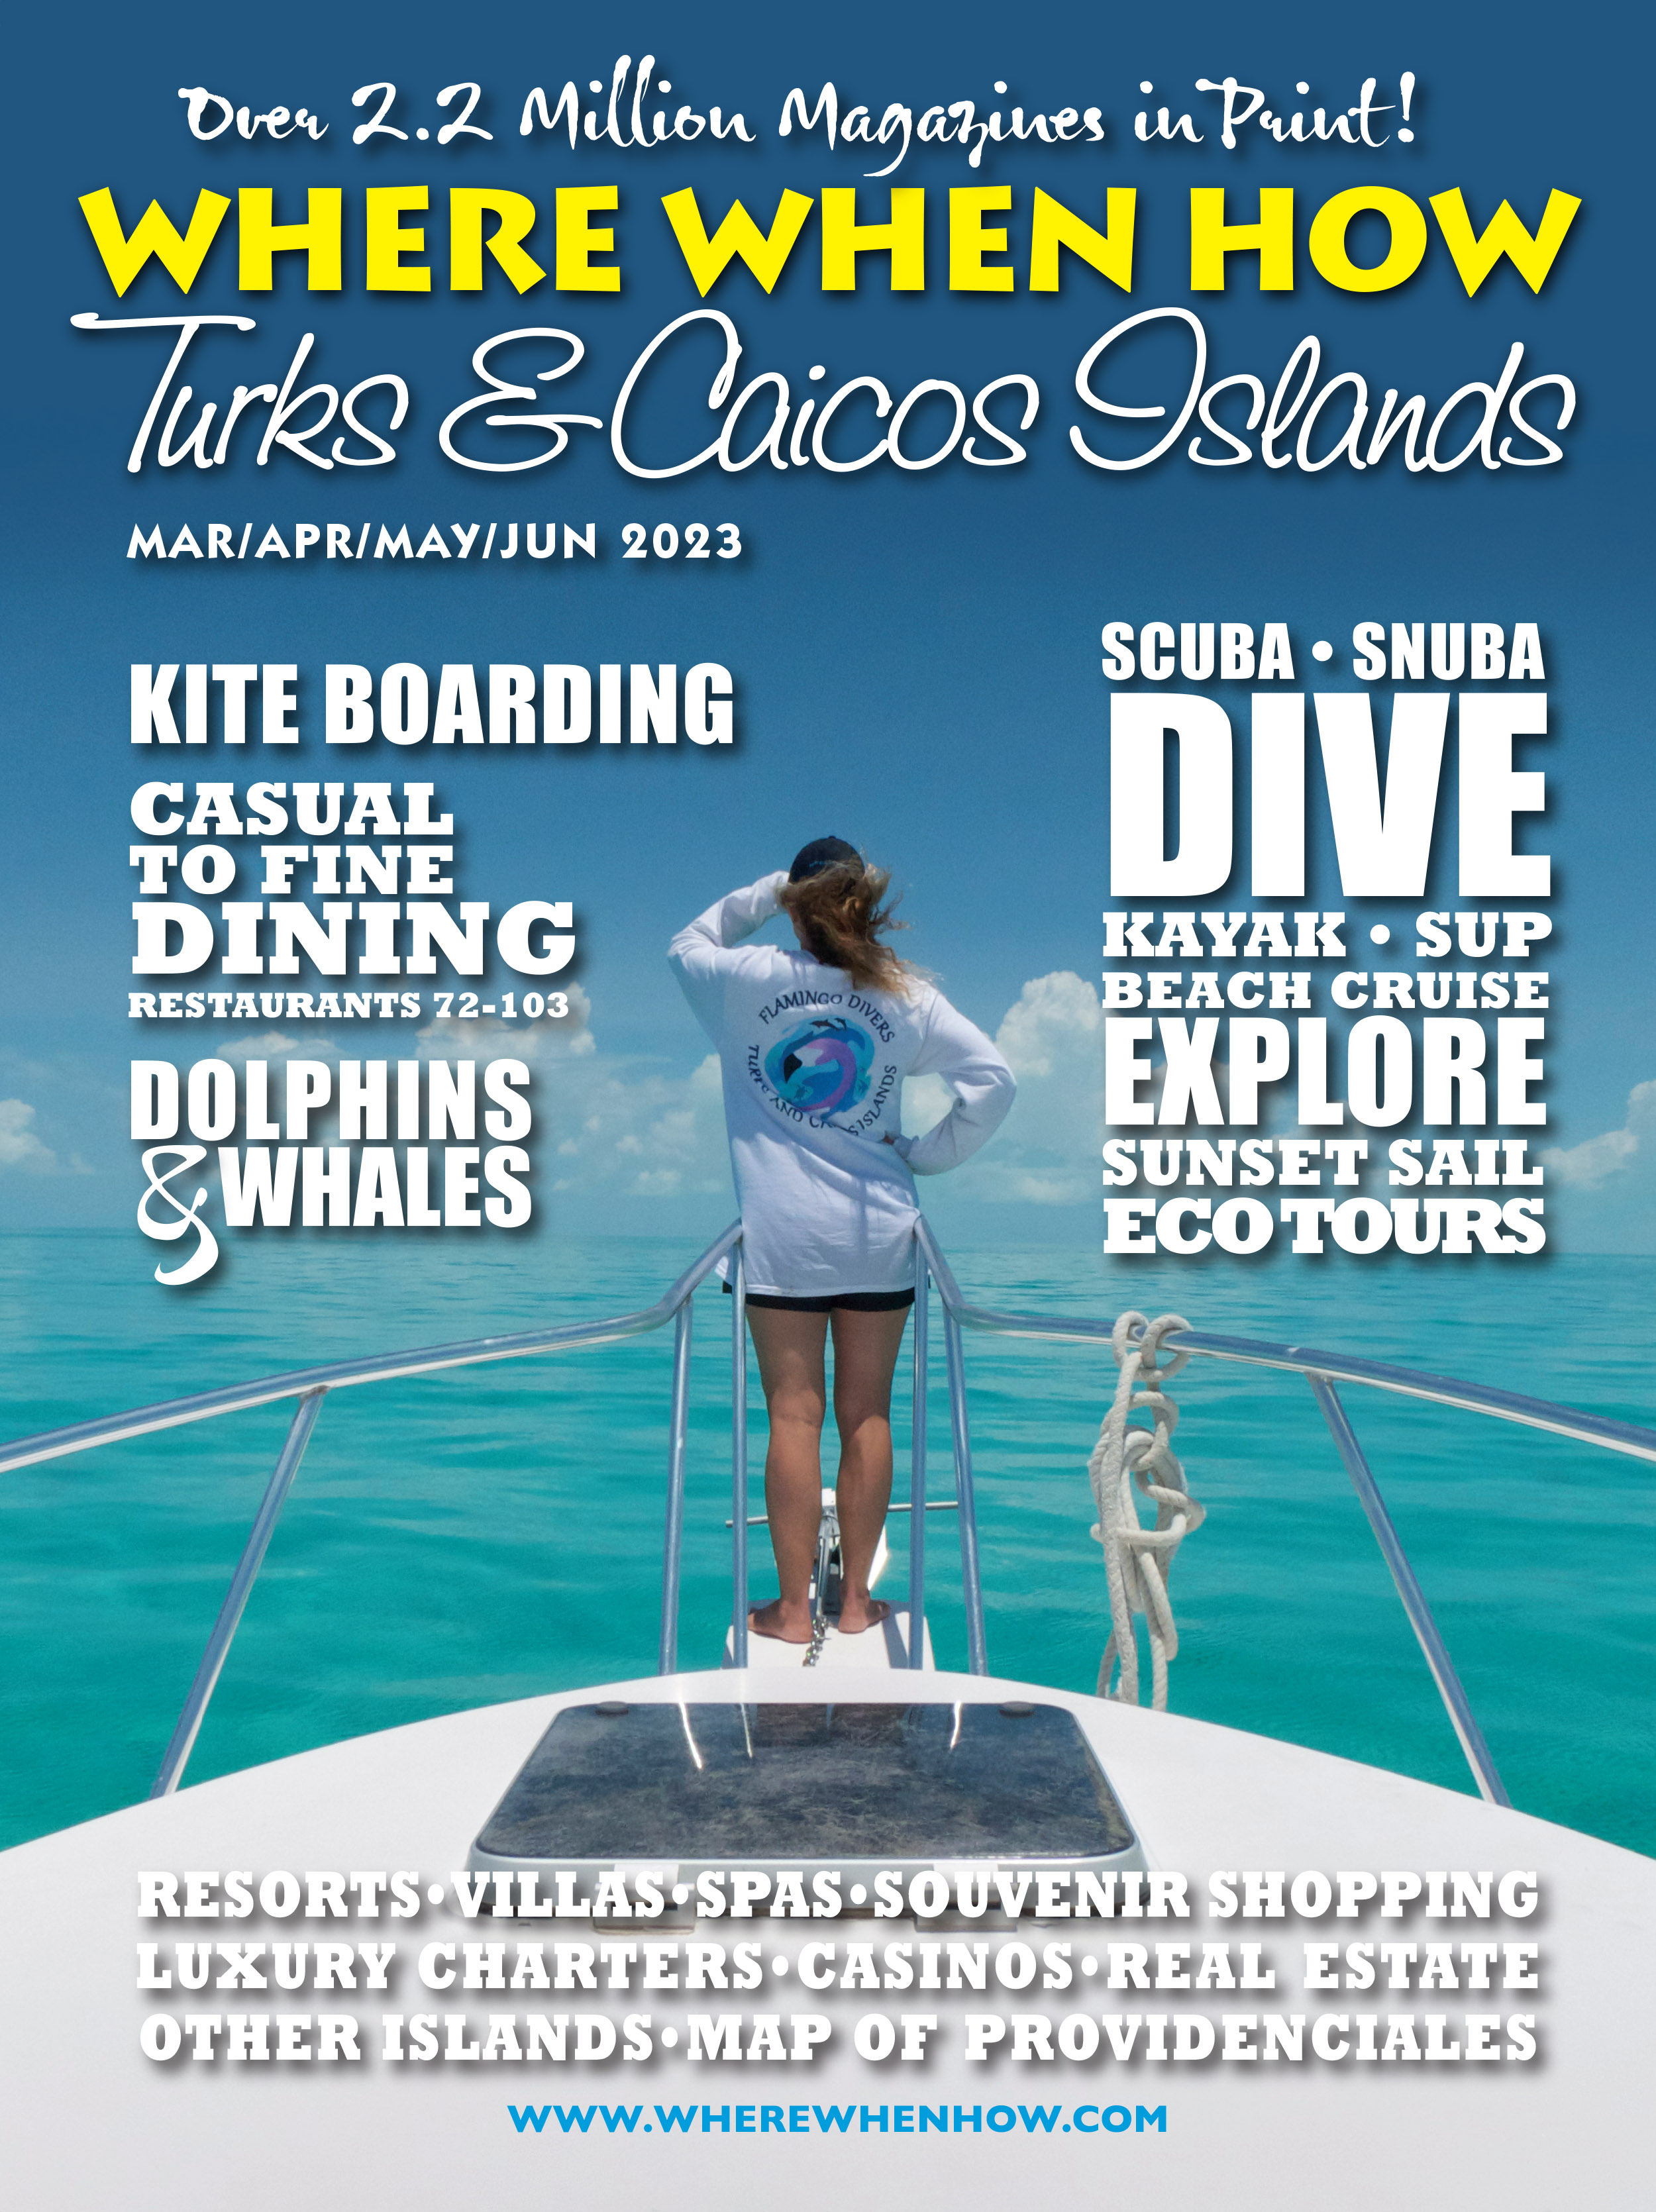 Read our March / April / May / June 2023 issue of Where When How - Turks & Caicos Islands magazine!